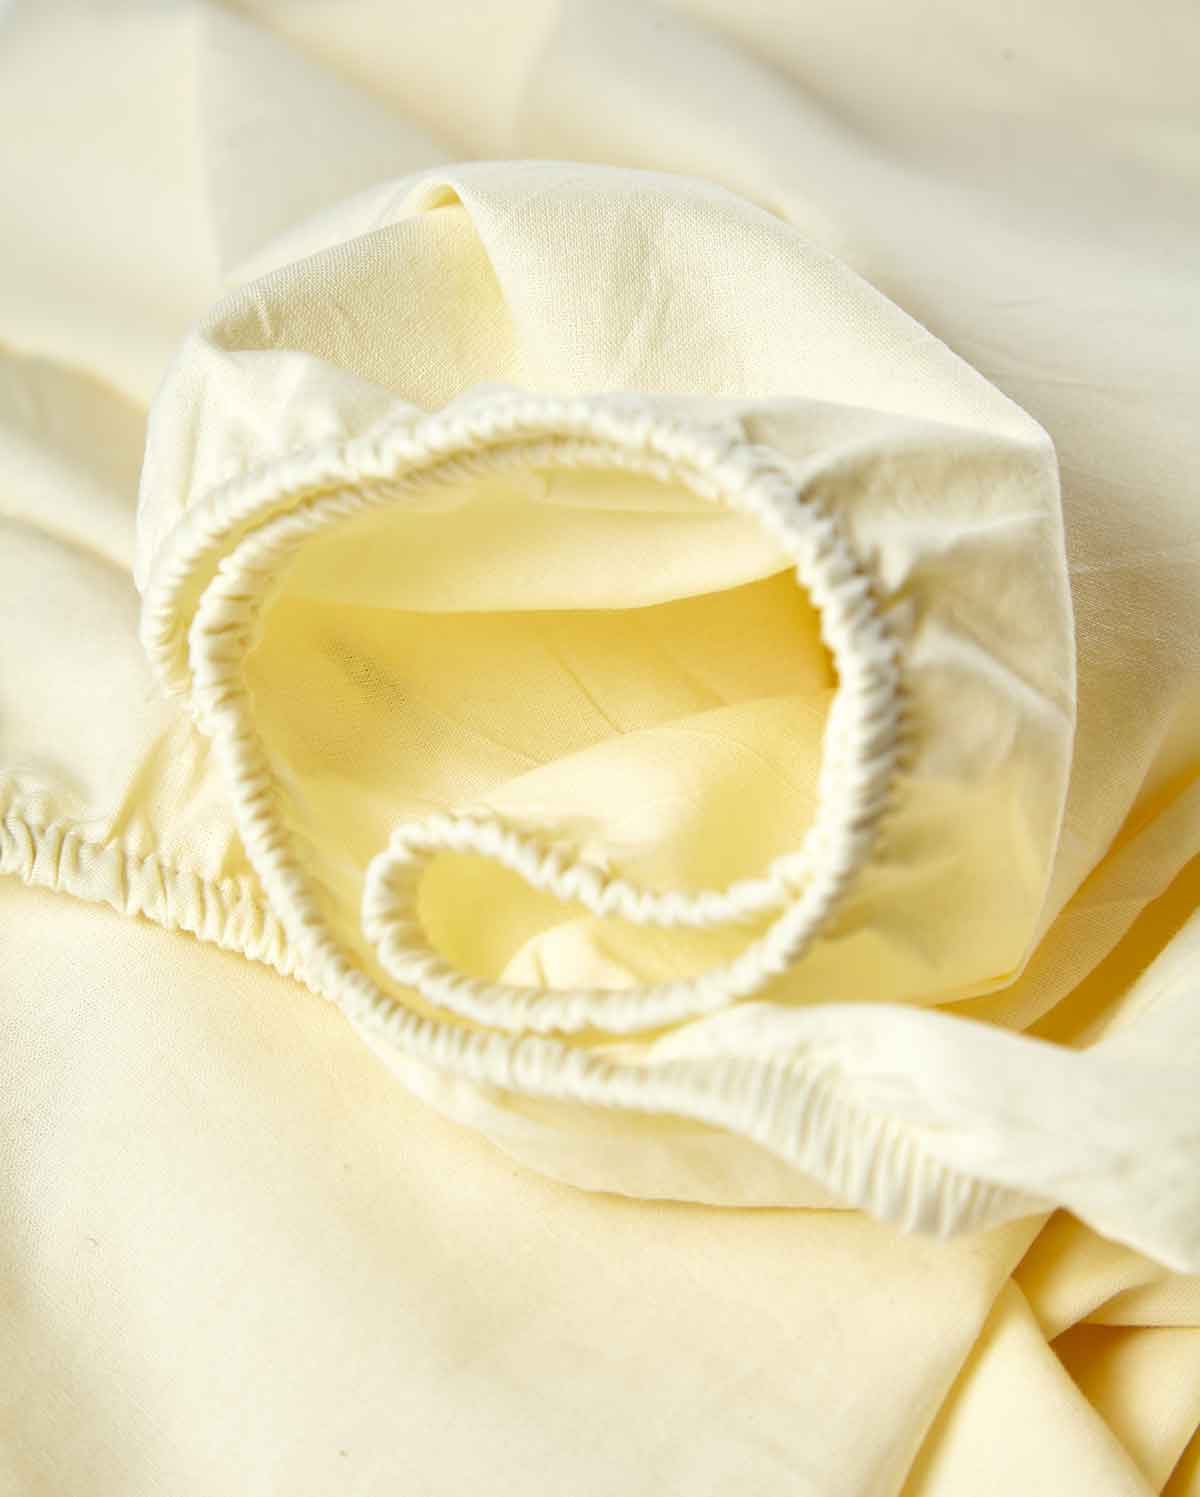 Classic Percale Fitted Sheet - Cream